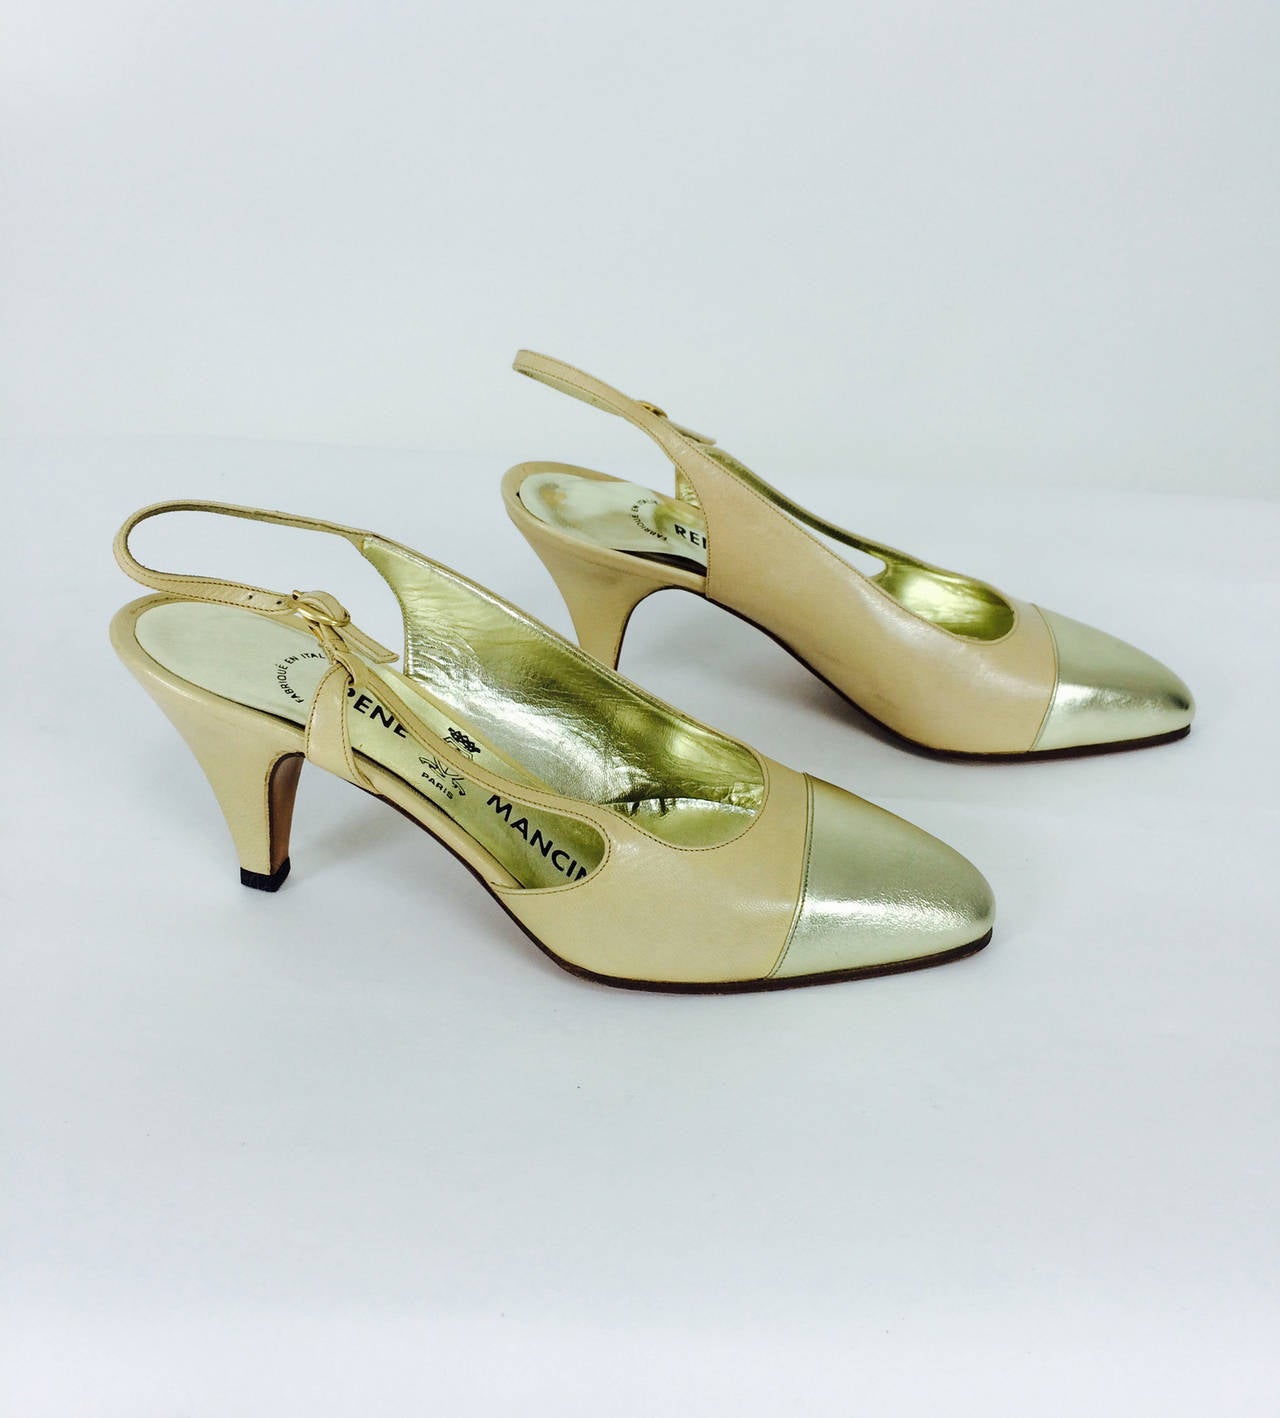 Rene' Mancini bone & gold leather sling back pumps 1970s...Marked size 36 M/N...Unworn and in excellent condition with the original box...